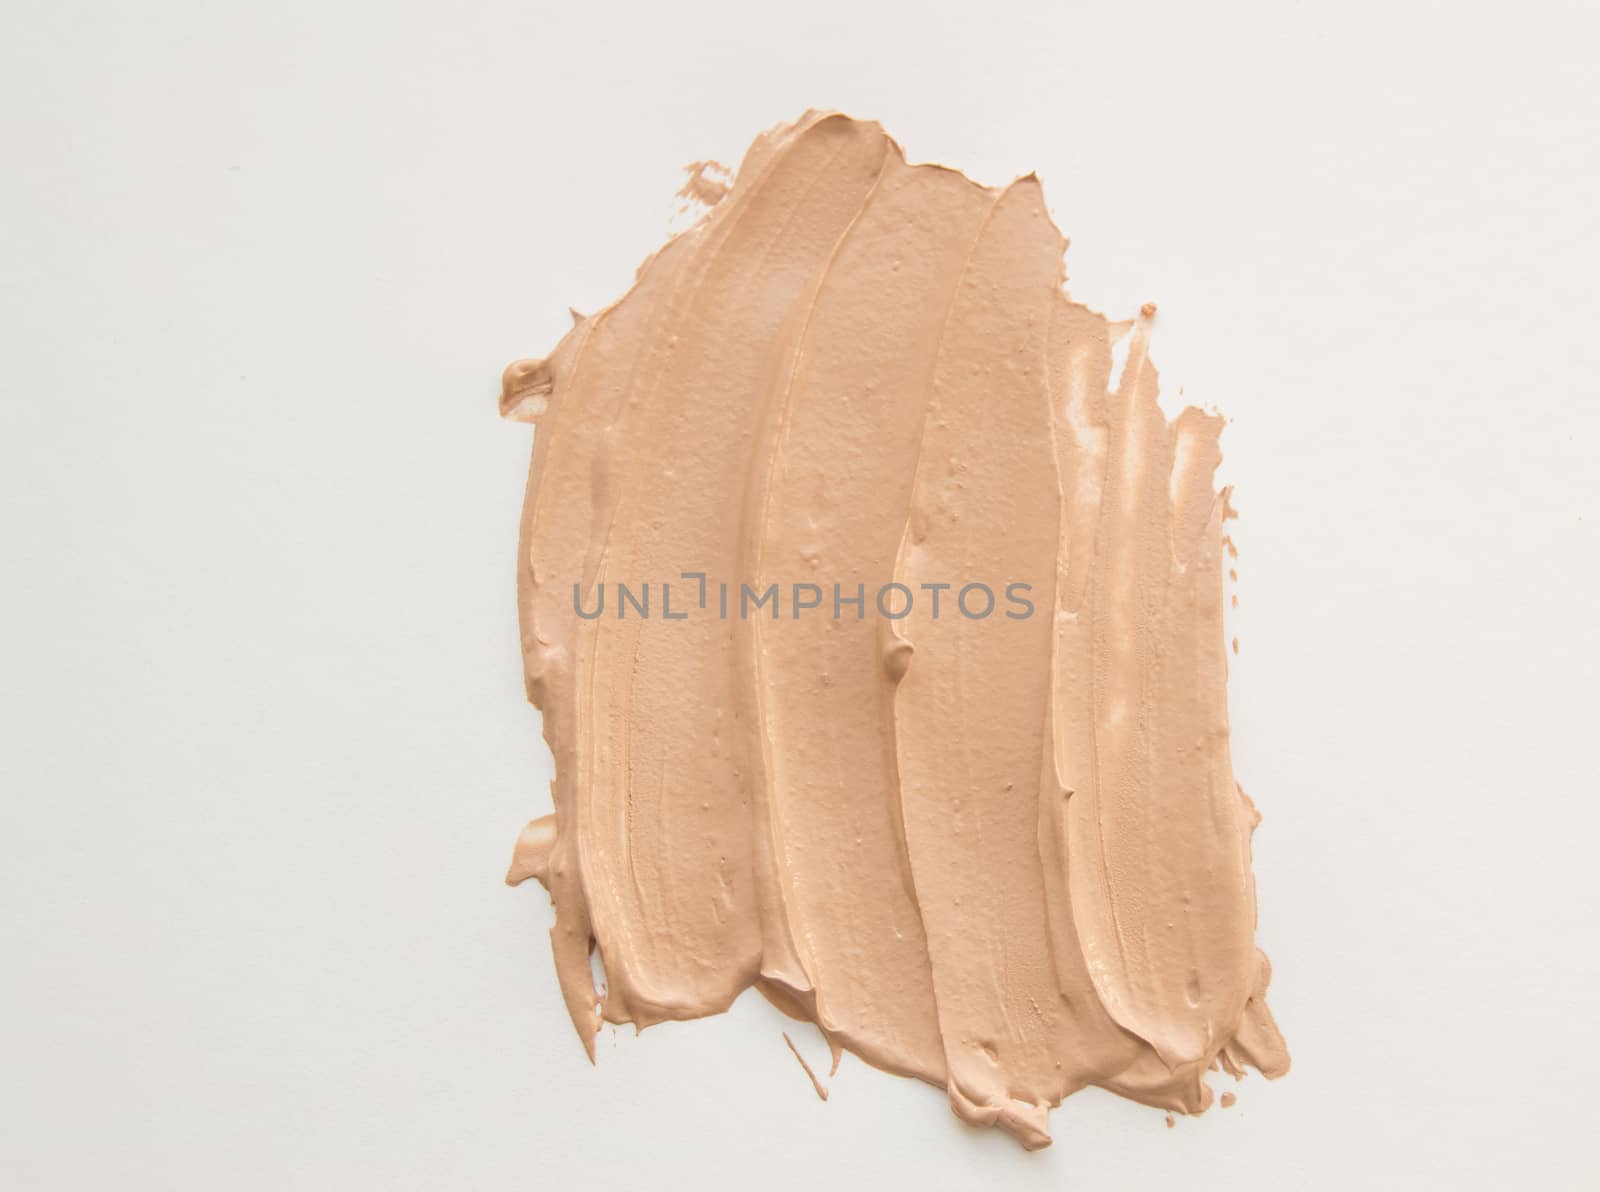 Foundation cream for makeup, make-up concept, smeared cosmetic cream on a white background by claire_lucia